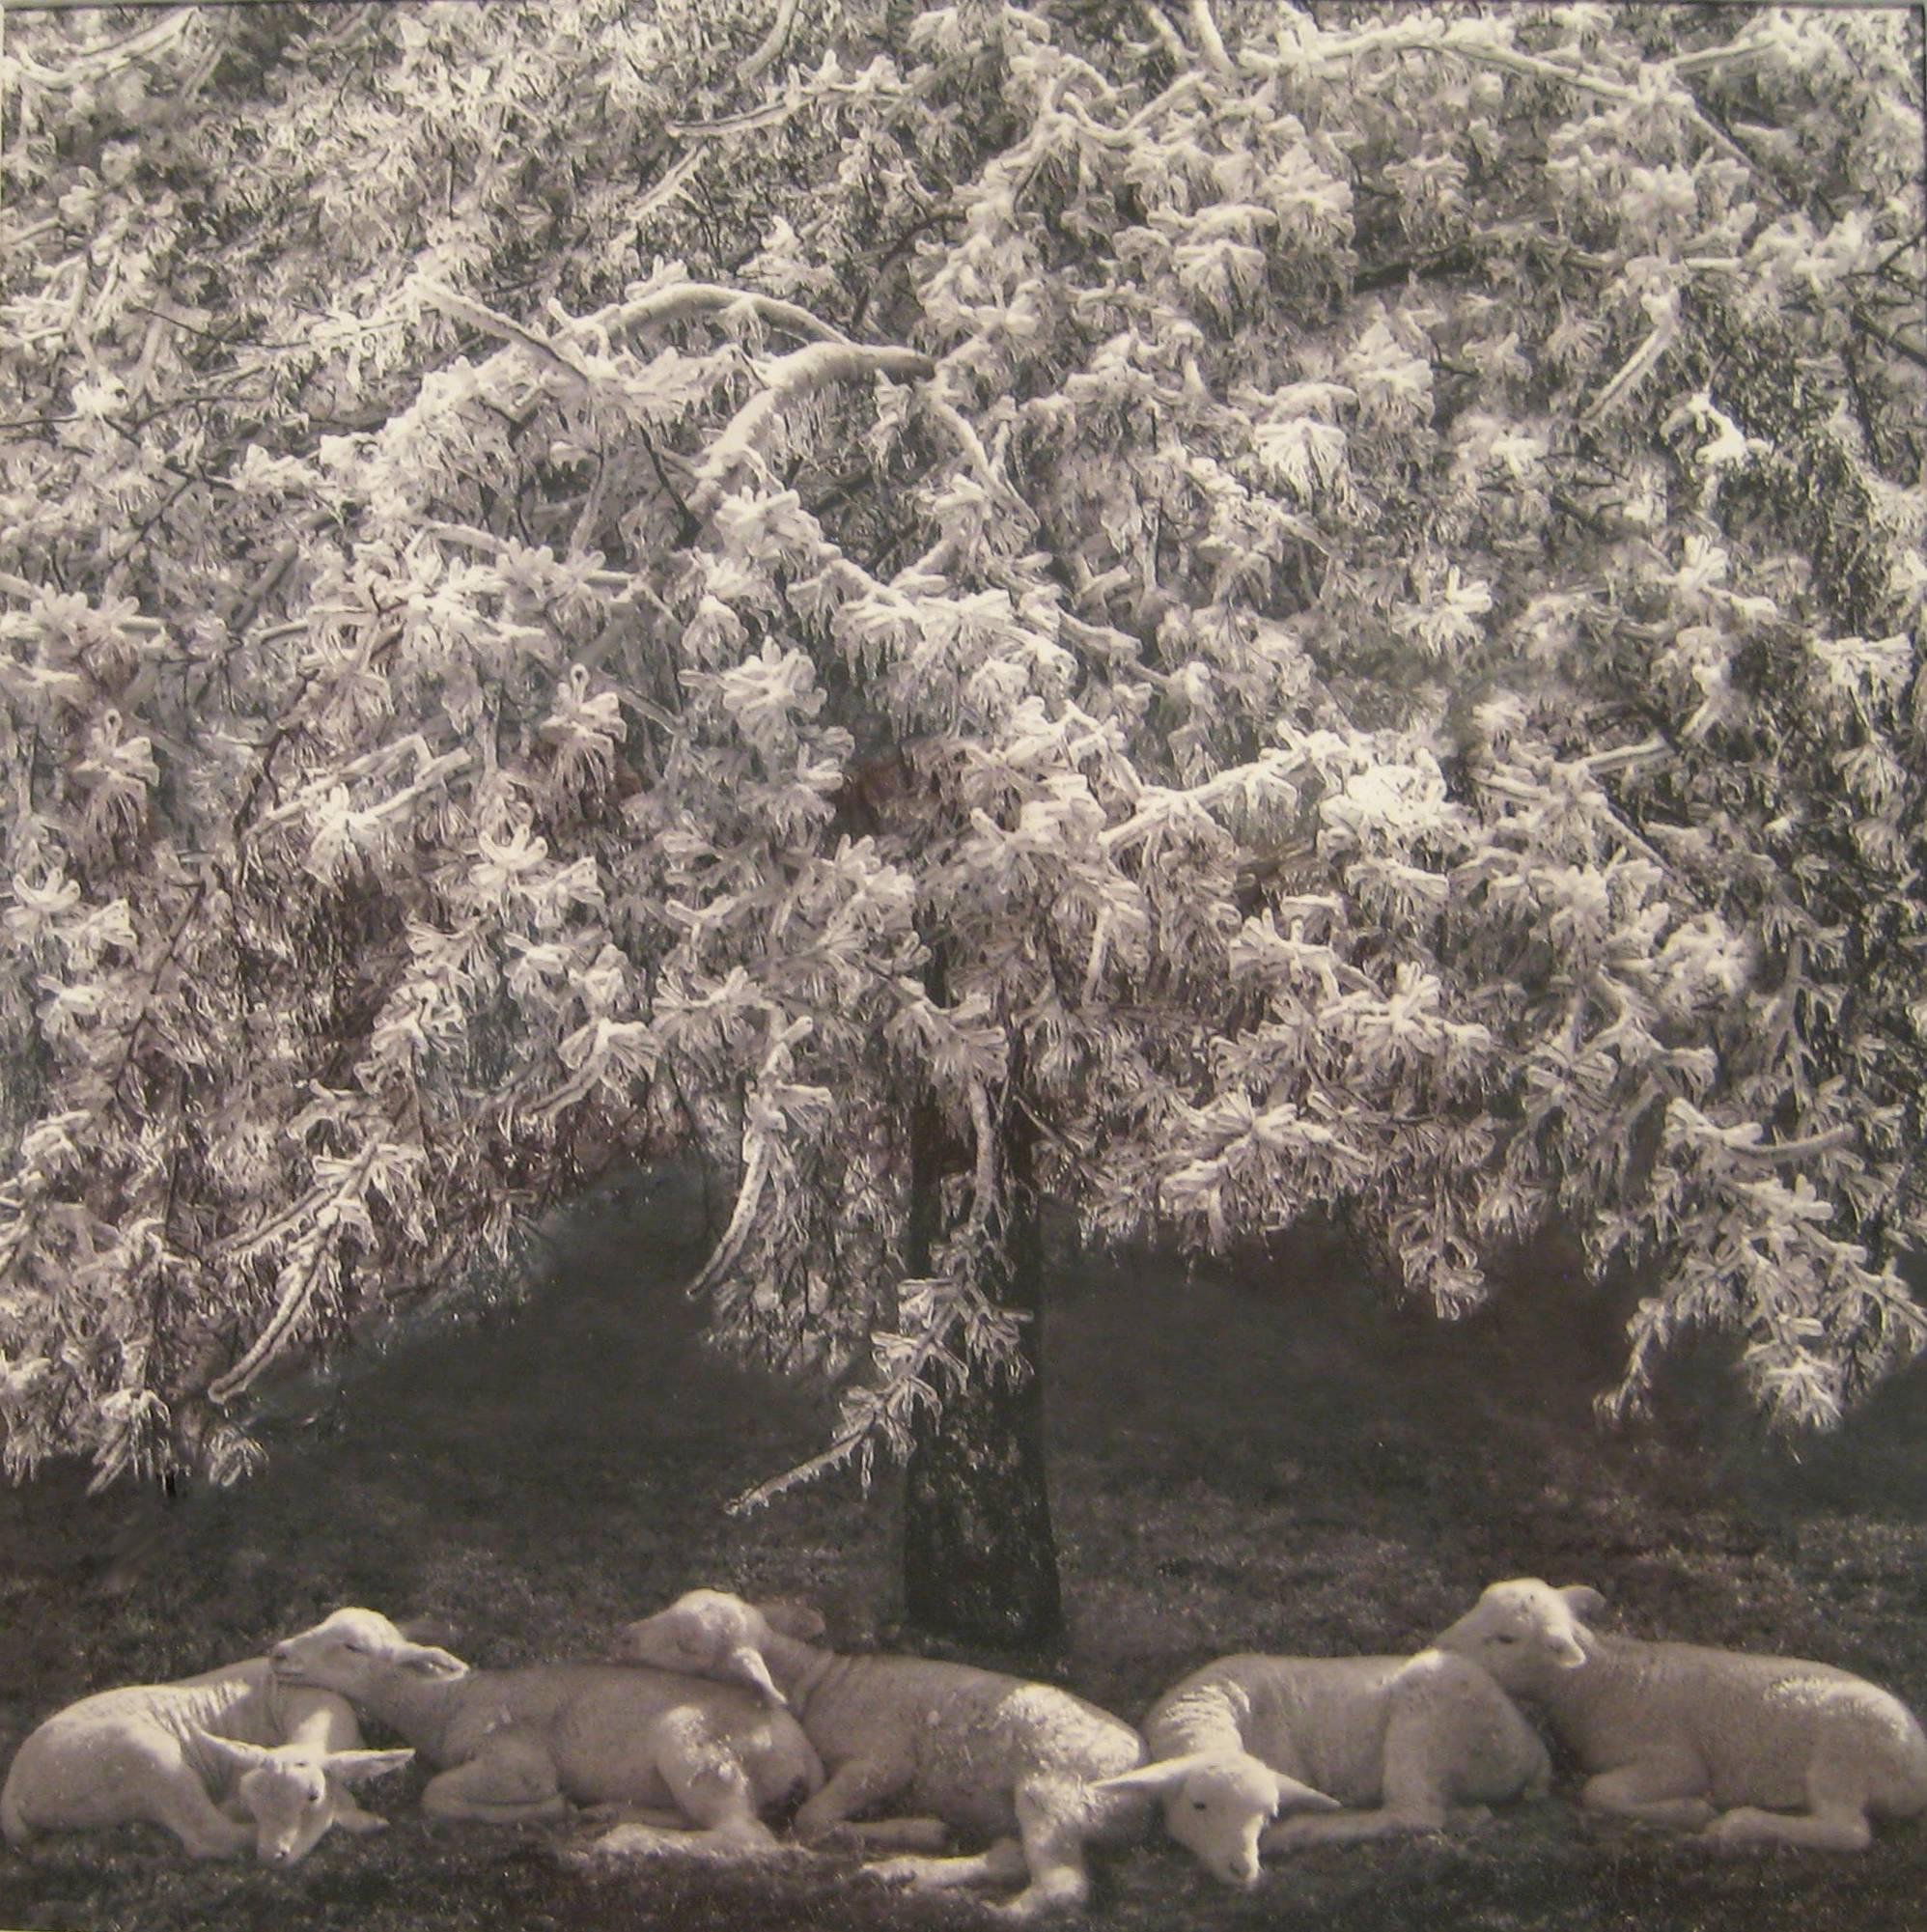 Contemporary black and white landscape photograph of white lambs sleeping under a snow capped tree
8 x 8 inches, unframed
14.5 x 14.5 inches in black frame with 8-ply mat

This modern black and white, still life photograph of white baby lambs